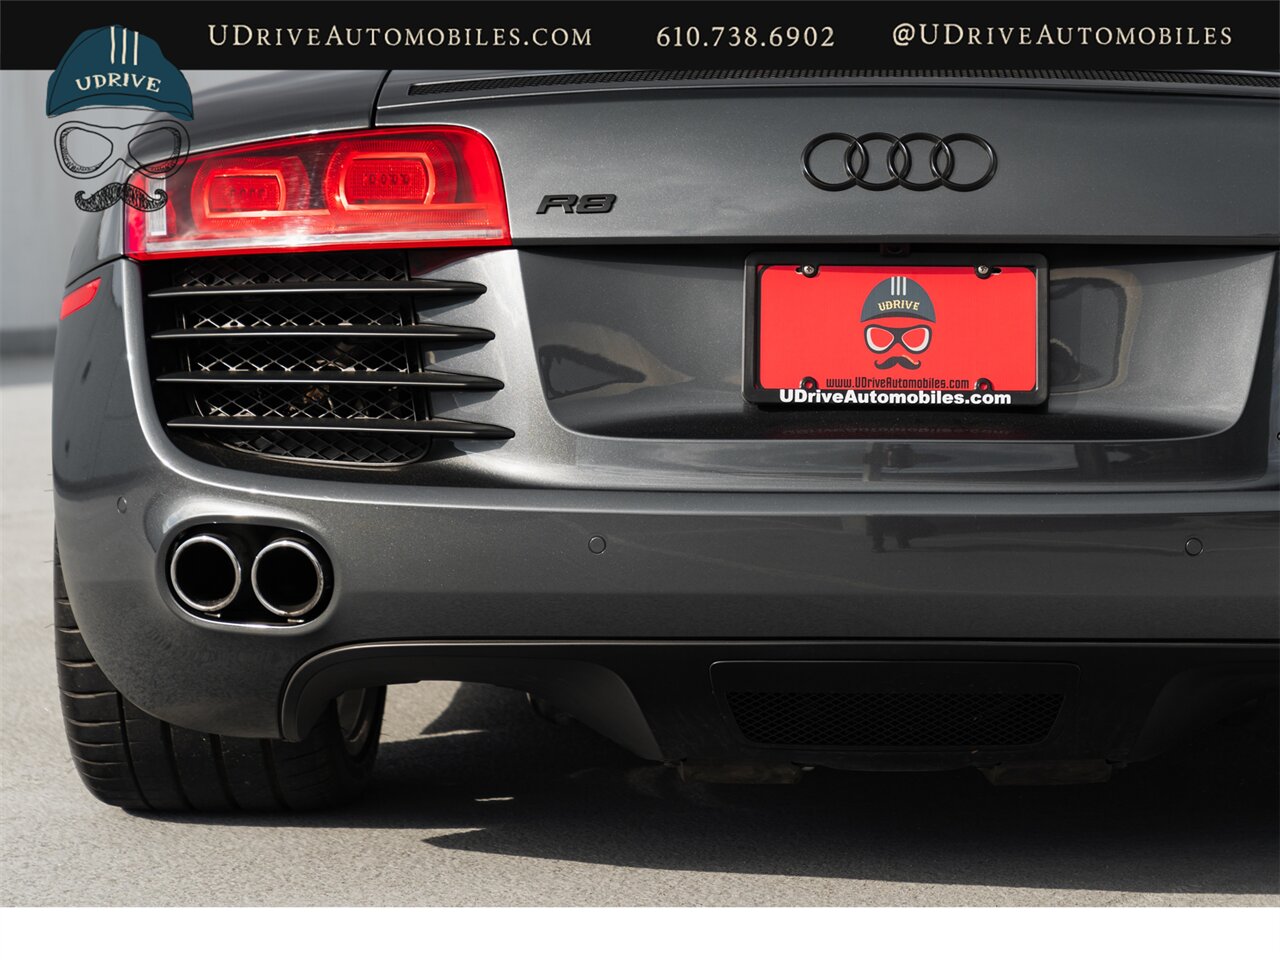 2009 Audi R8 Quattro  4.2 V8 6 Speed Manual 15k Miles - Photo 25 - West Chester, PA 19382